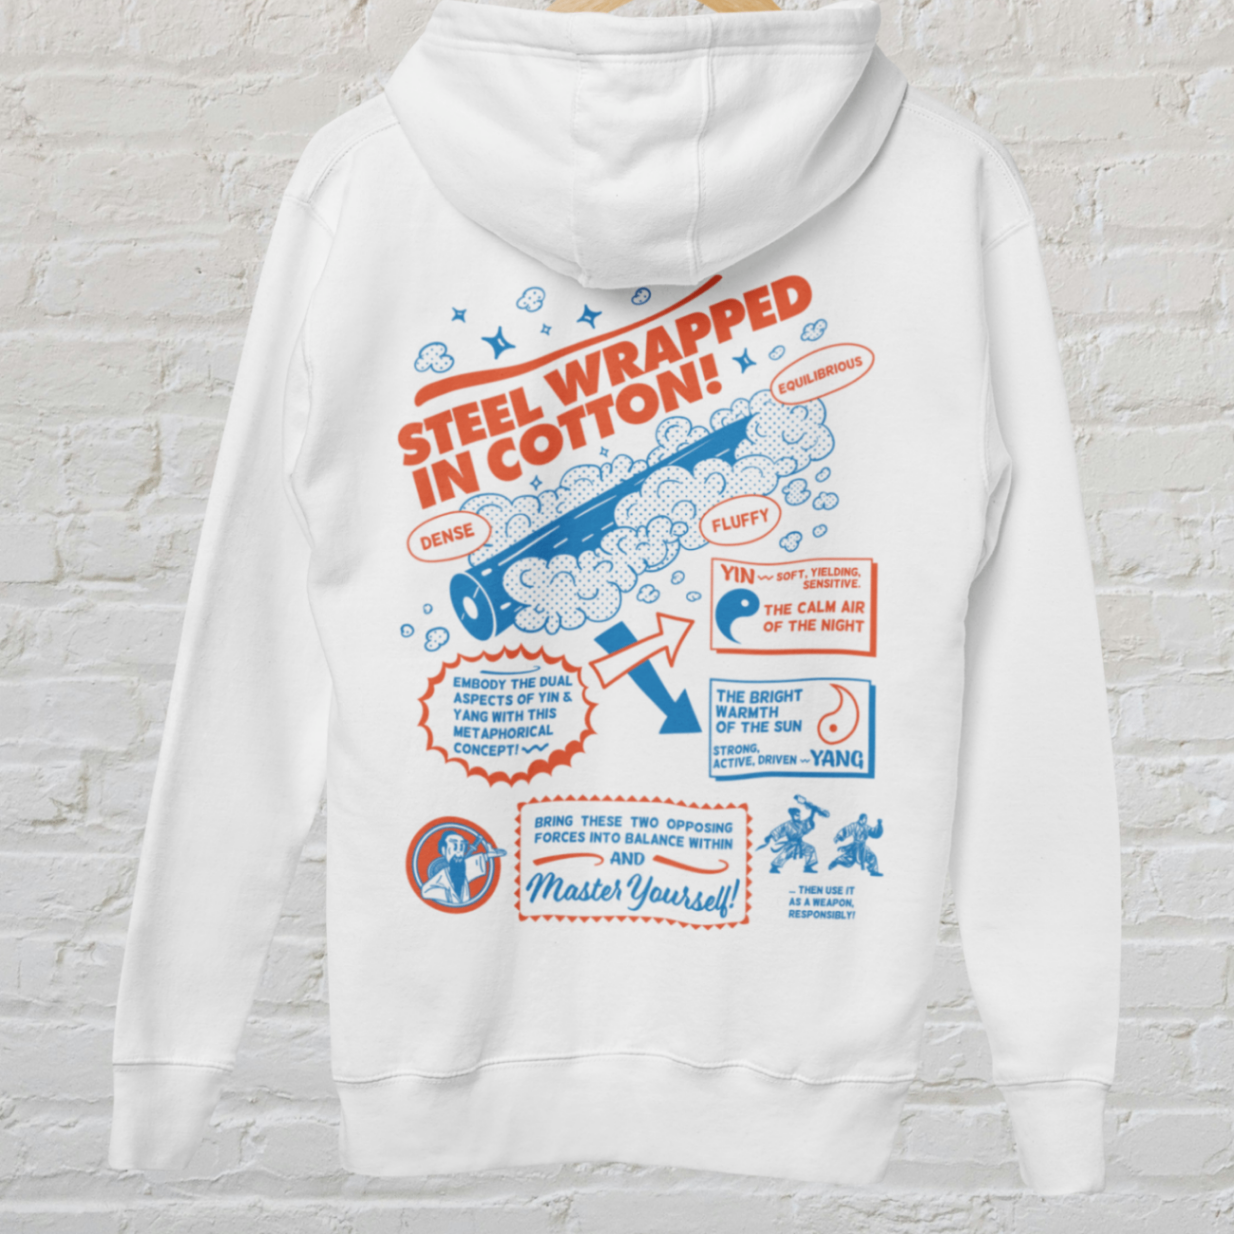 back view of a white zip up hoodie with steel wrapped in cotton design in red and blue text on a hanger